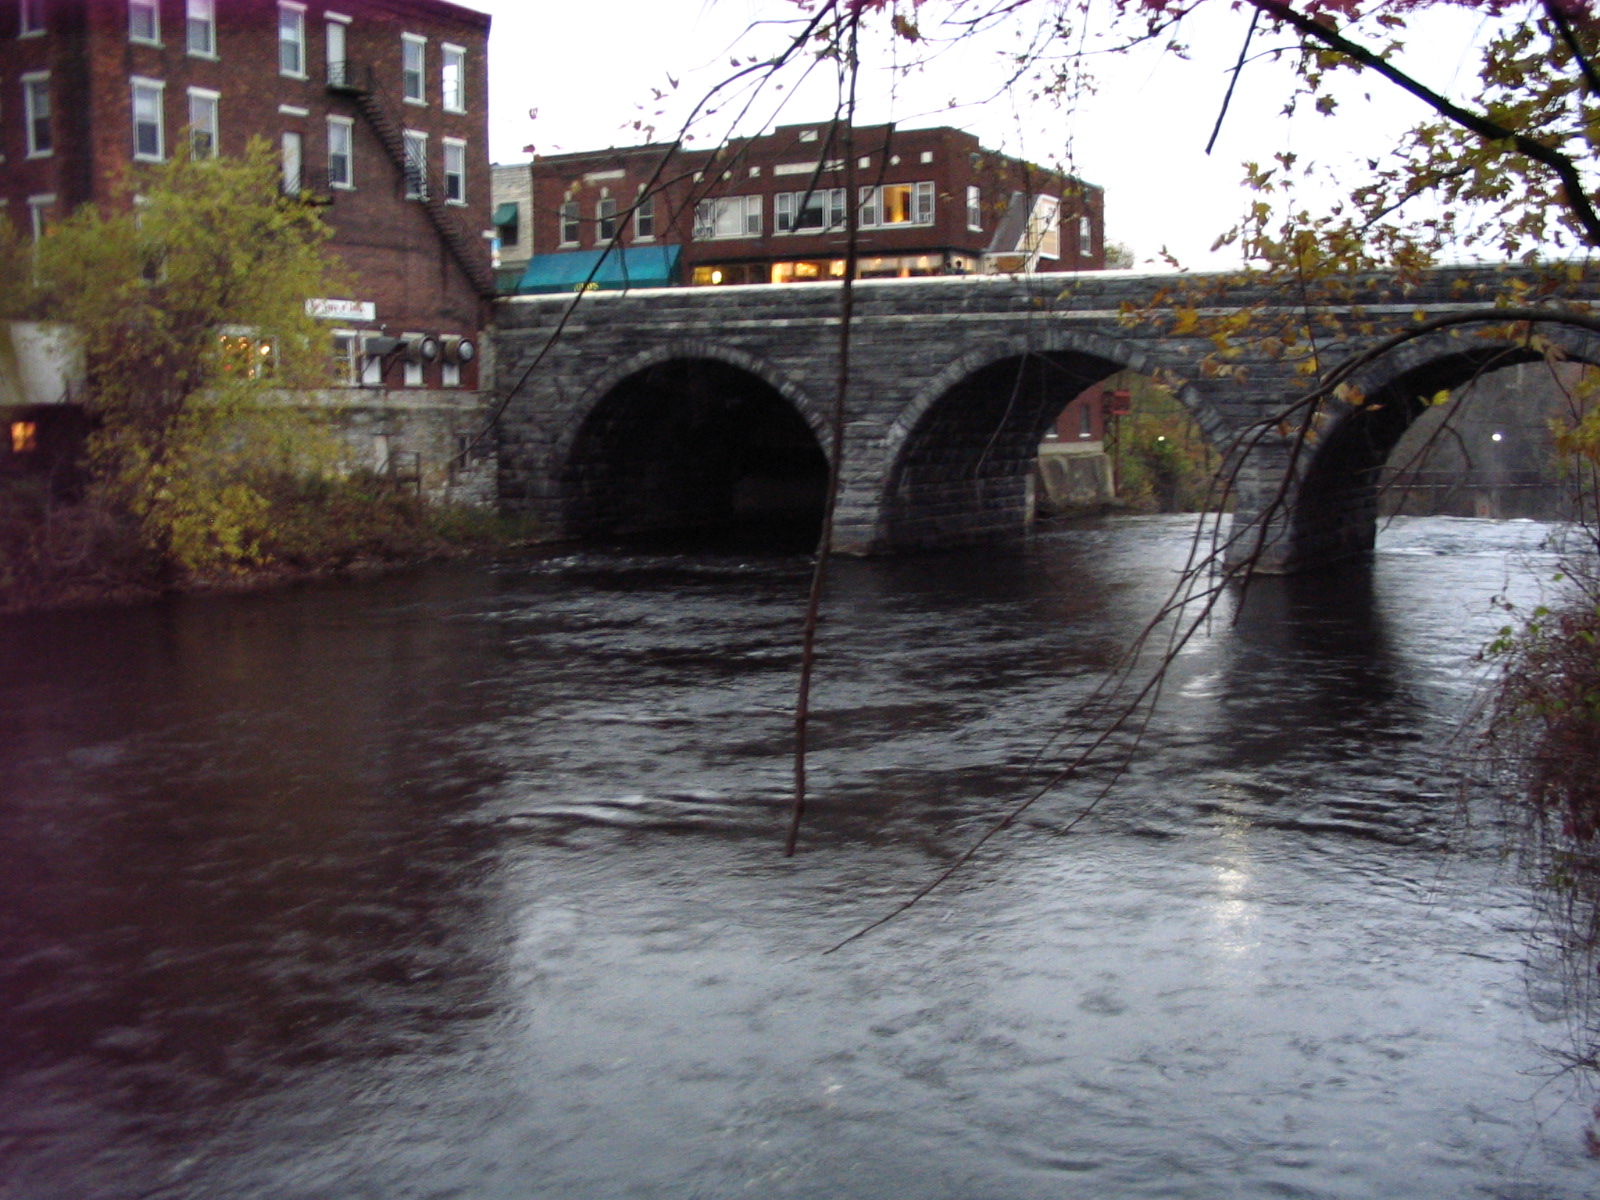 Photograph of the Otter Creek at Middlebury, VT (MDBV1) looking downstream